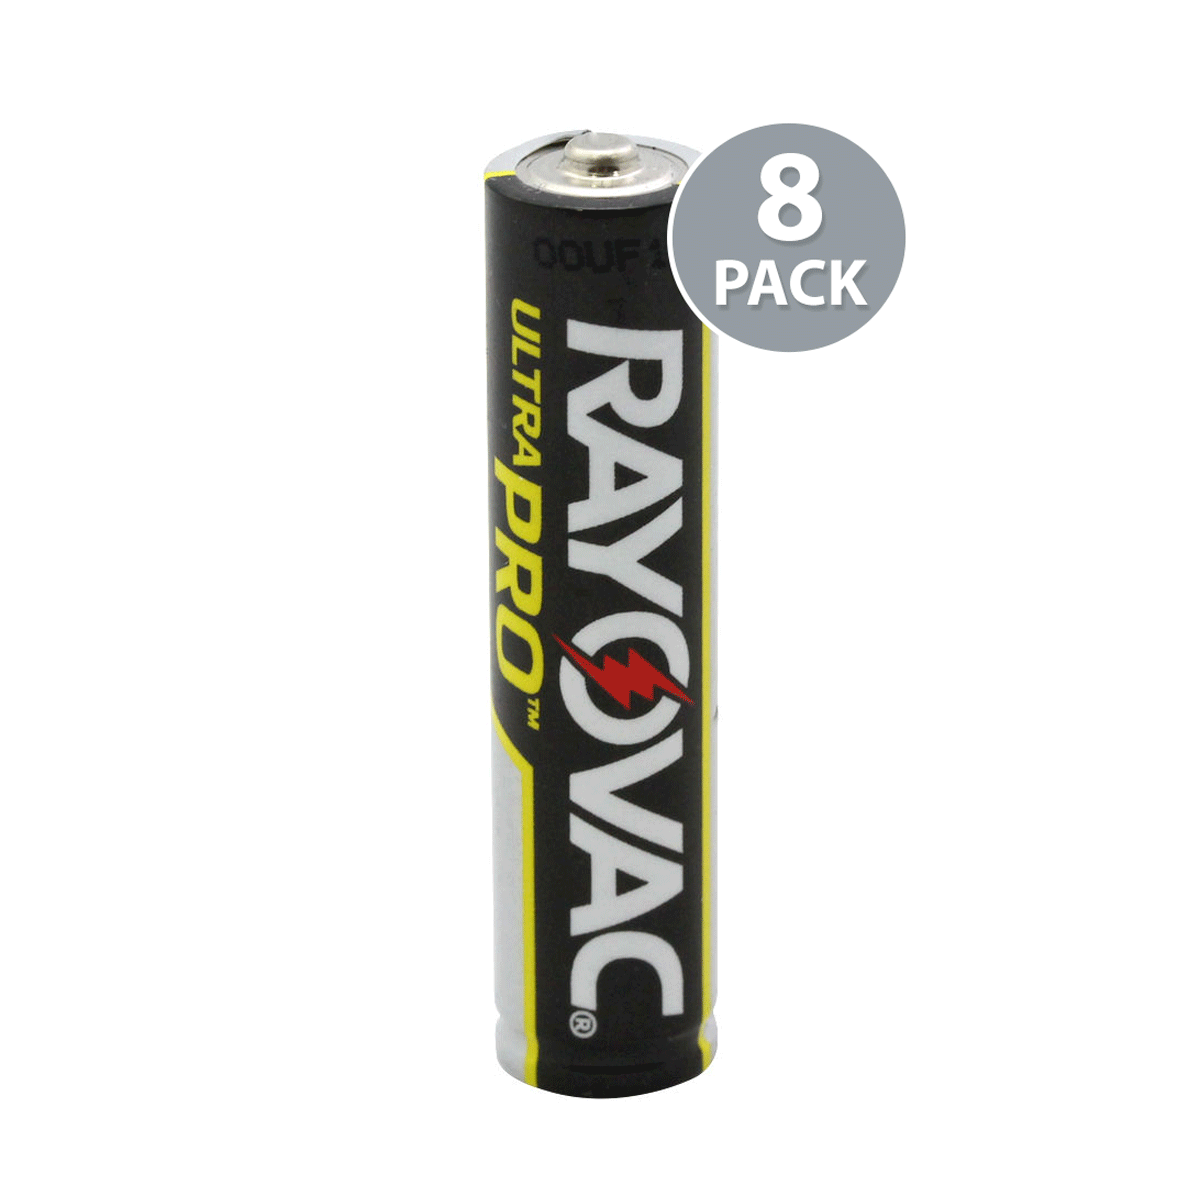 Rayovac Ultra Pro AAA Cell Batteries 8pack